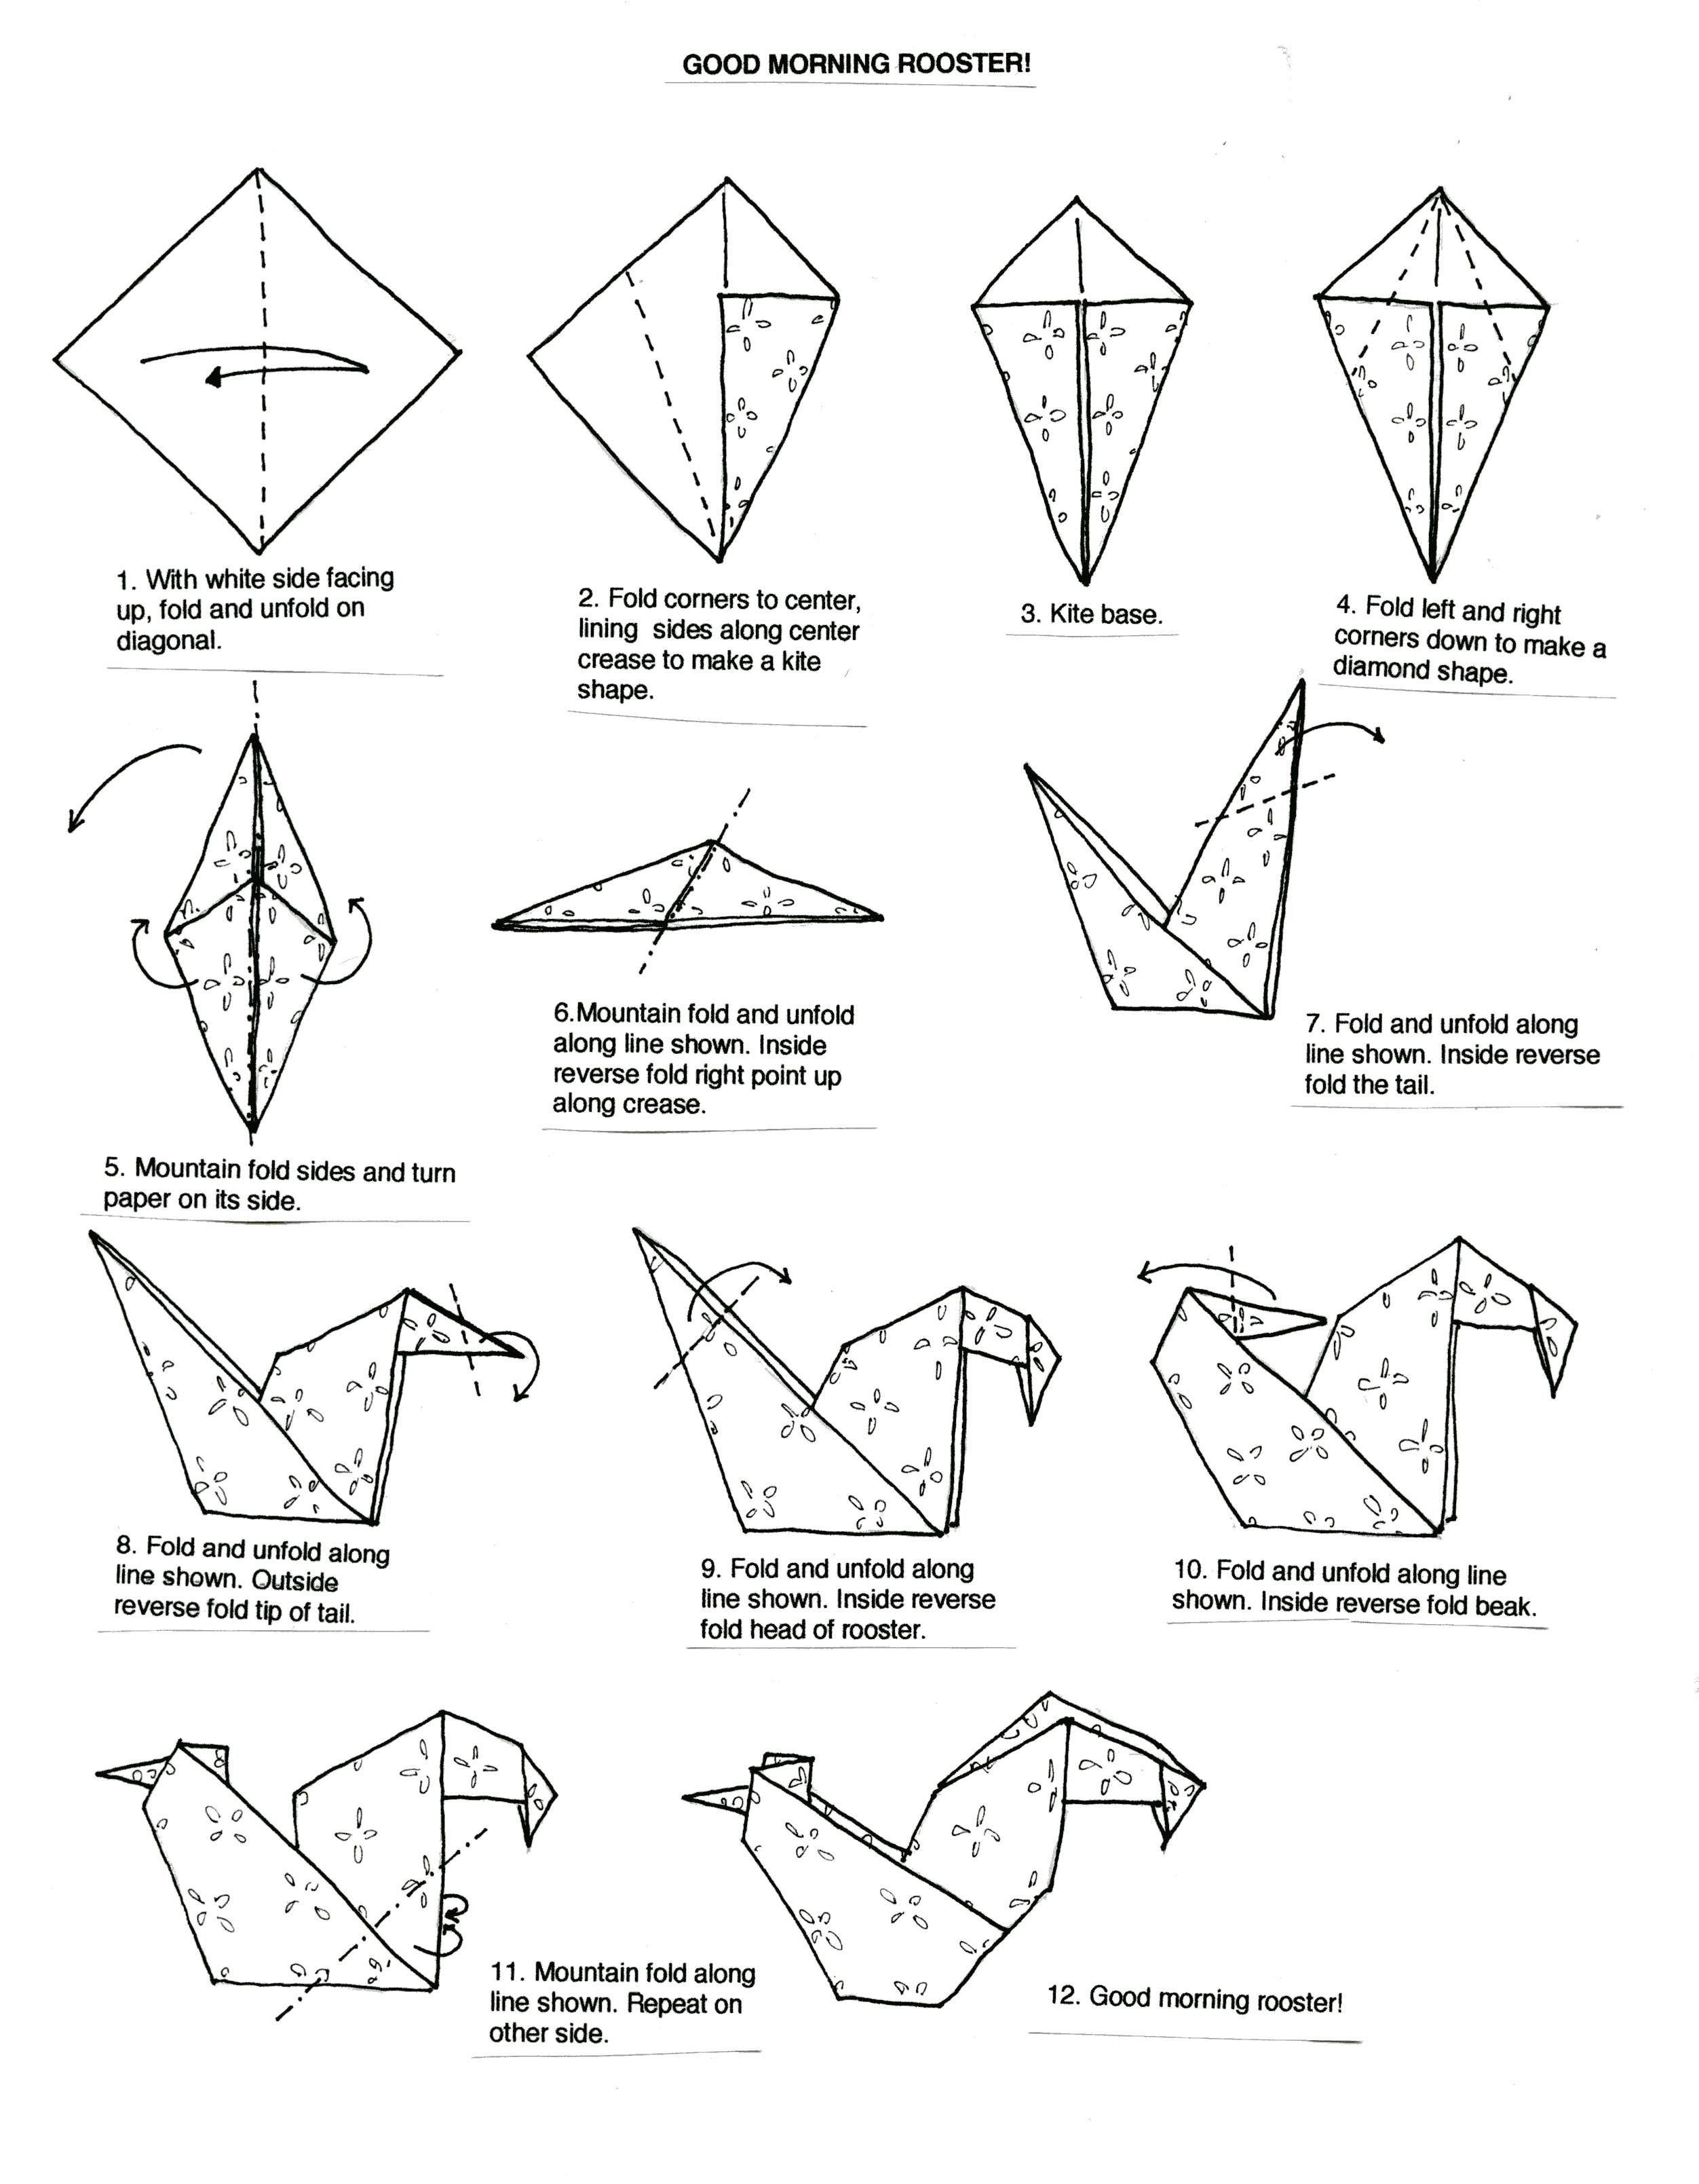 How To Fold An Origami Swan Origami Paintings Search Result At Paintingvalley